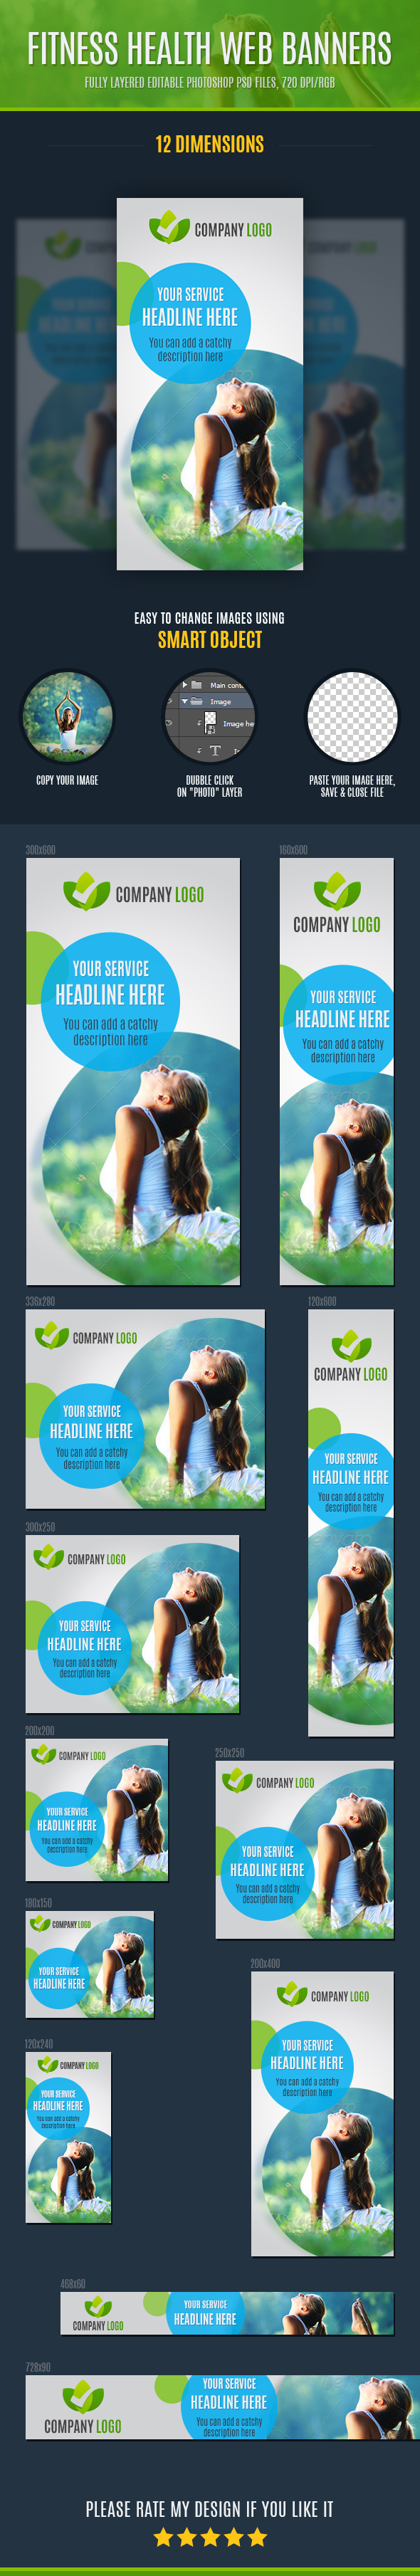 ad banners ads advertising banner advt body shape fitness ads fitness adverts fitness banners gym Health healthy photoshop strong Web